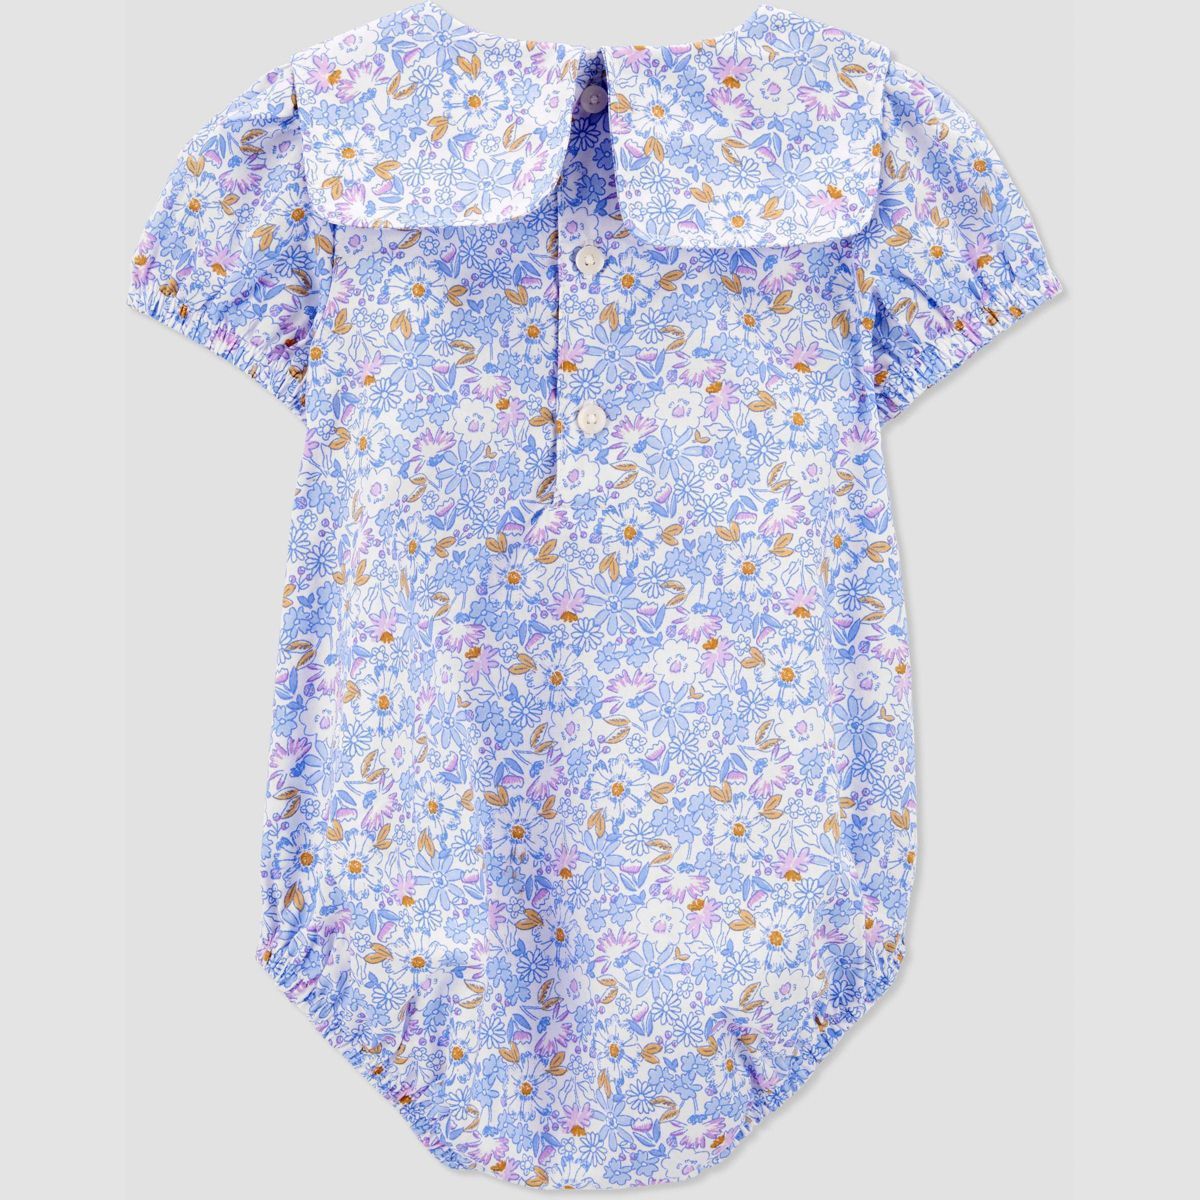 Carter's Just One You® Baby Girls' Floral Bubble Top & Bottom Set - Purple | Target